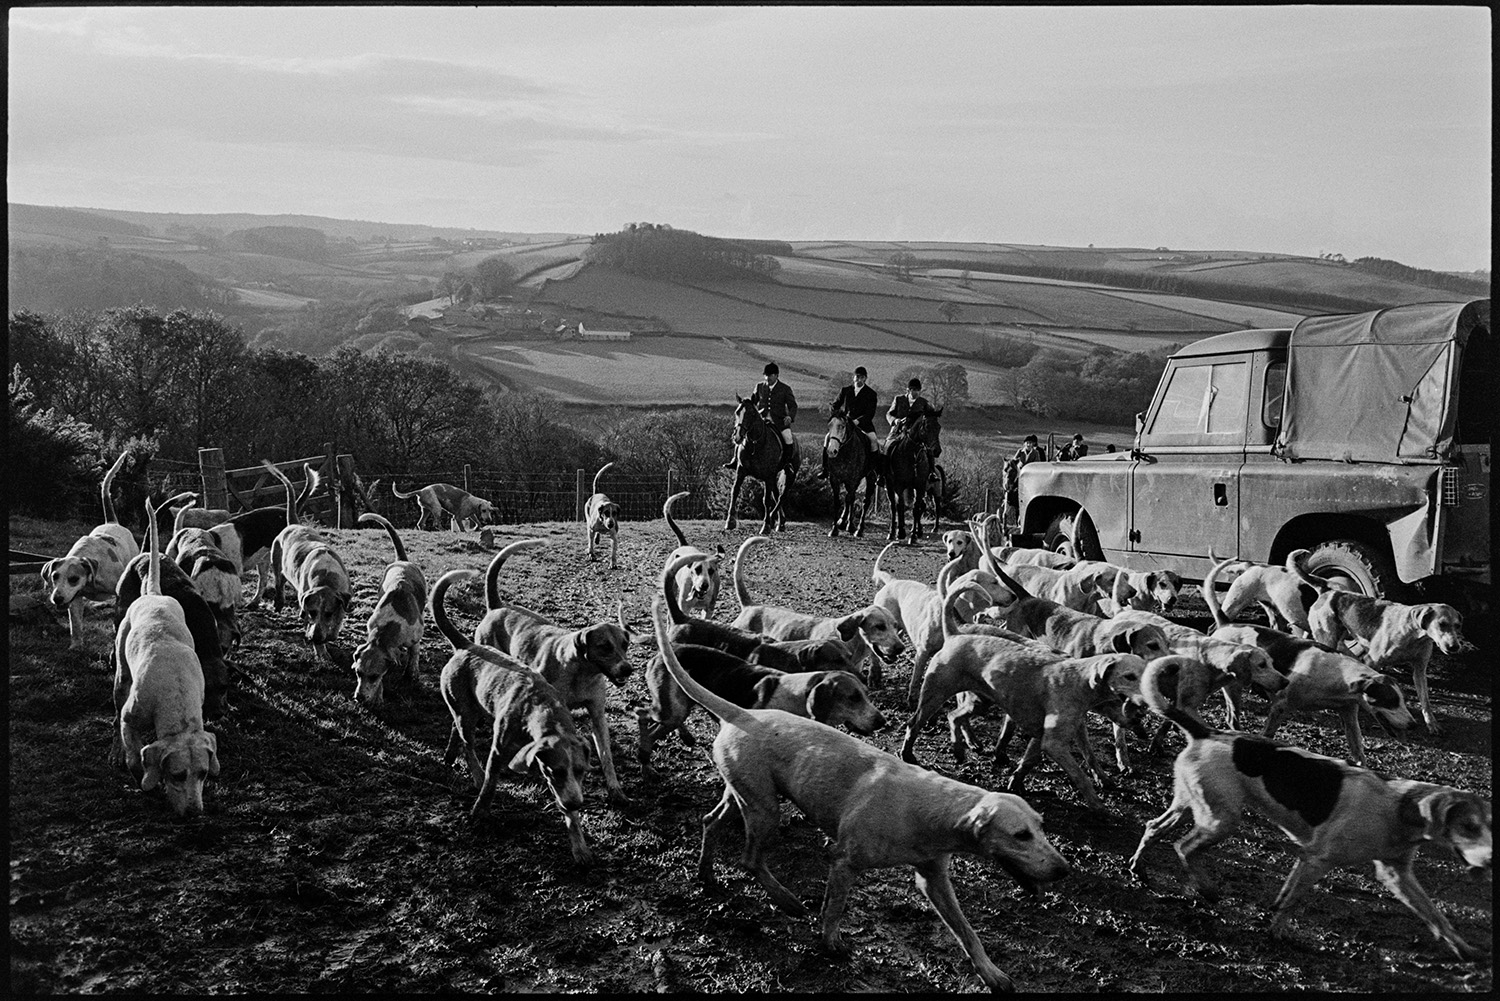 Hunters, horses and followers waiting for a scent, listening for hounds. 
[Huntsmen on horses, and hounds, running through a field and past a Land Rover at Halsdon, Dolton. A hilly landscape of fields, hedges and woodland is visible in the background.]